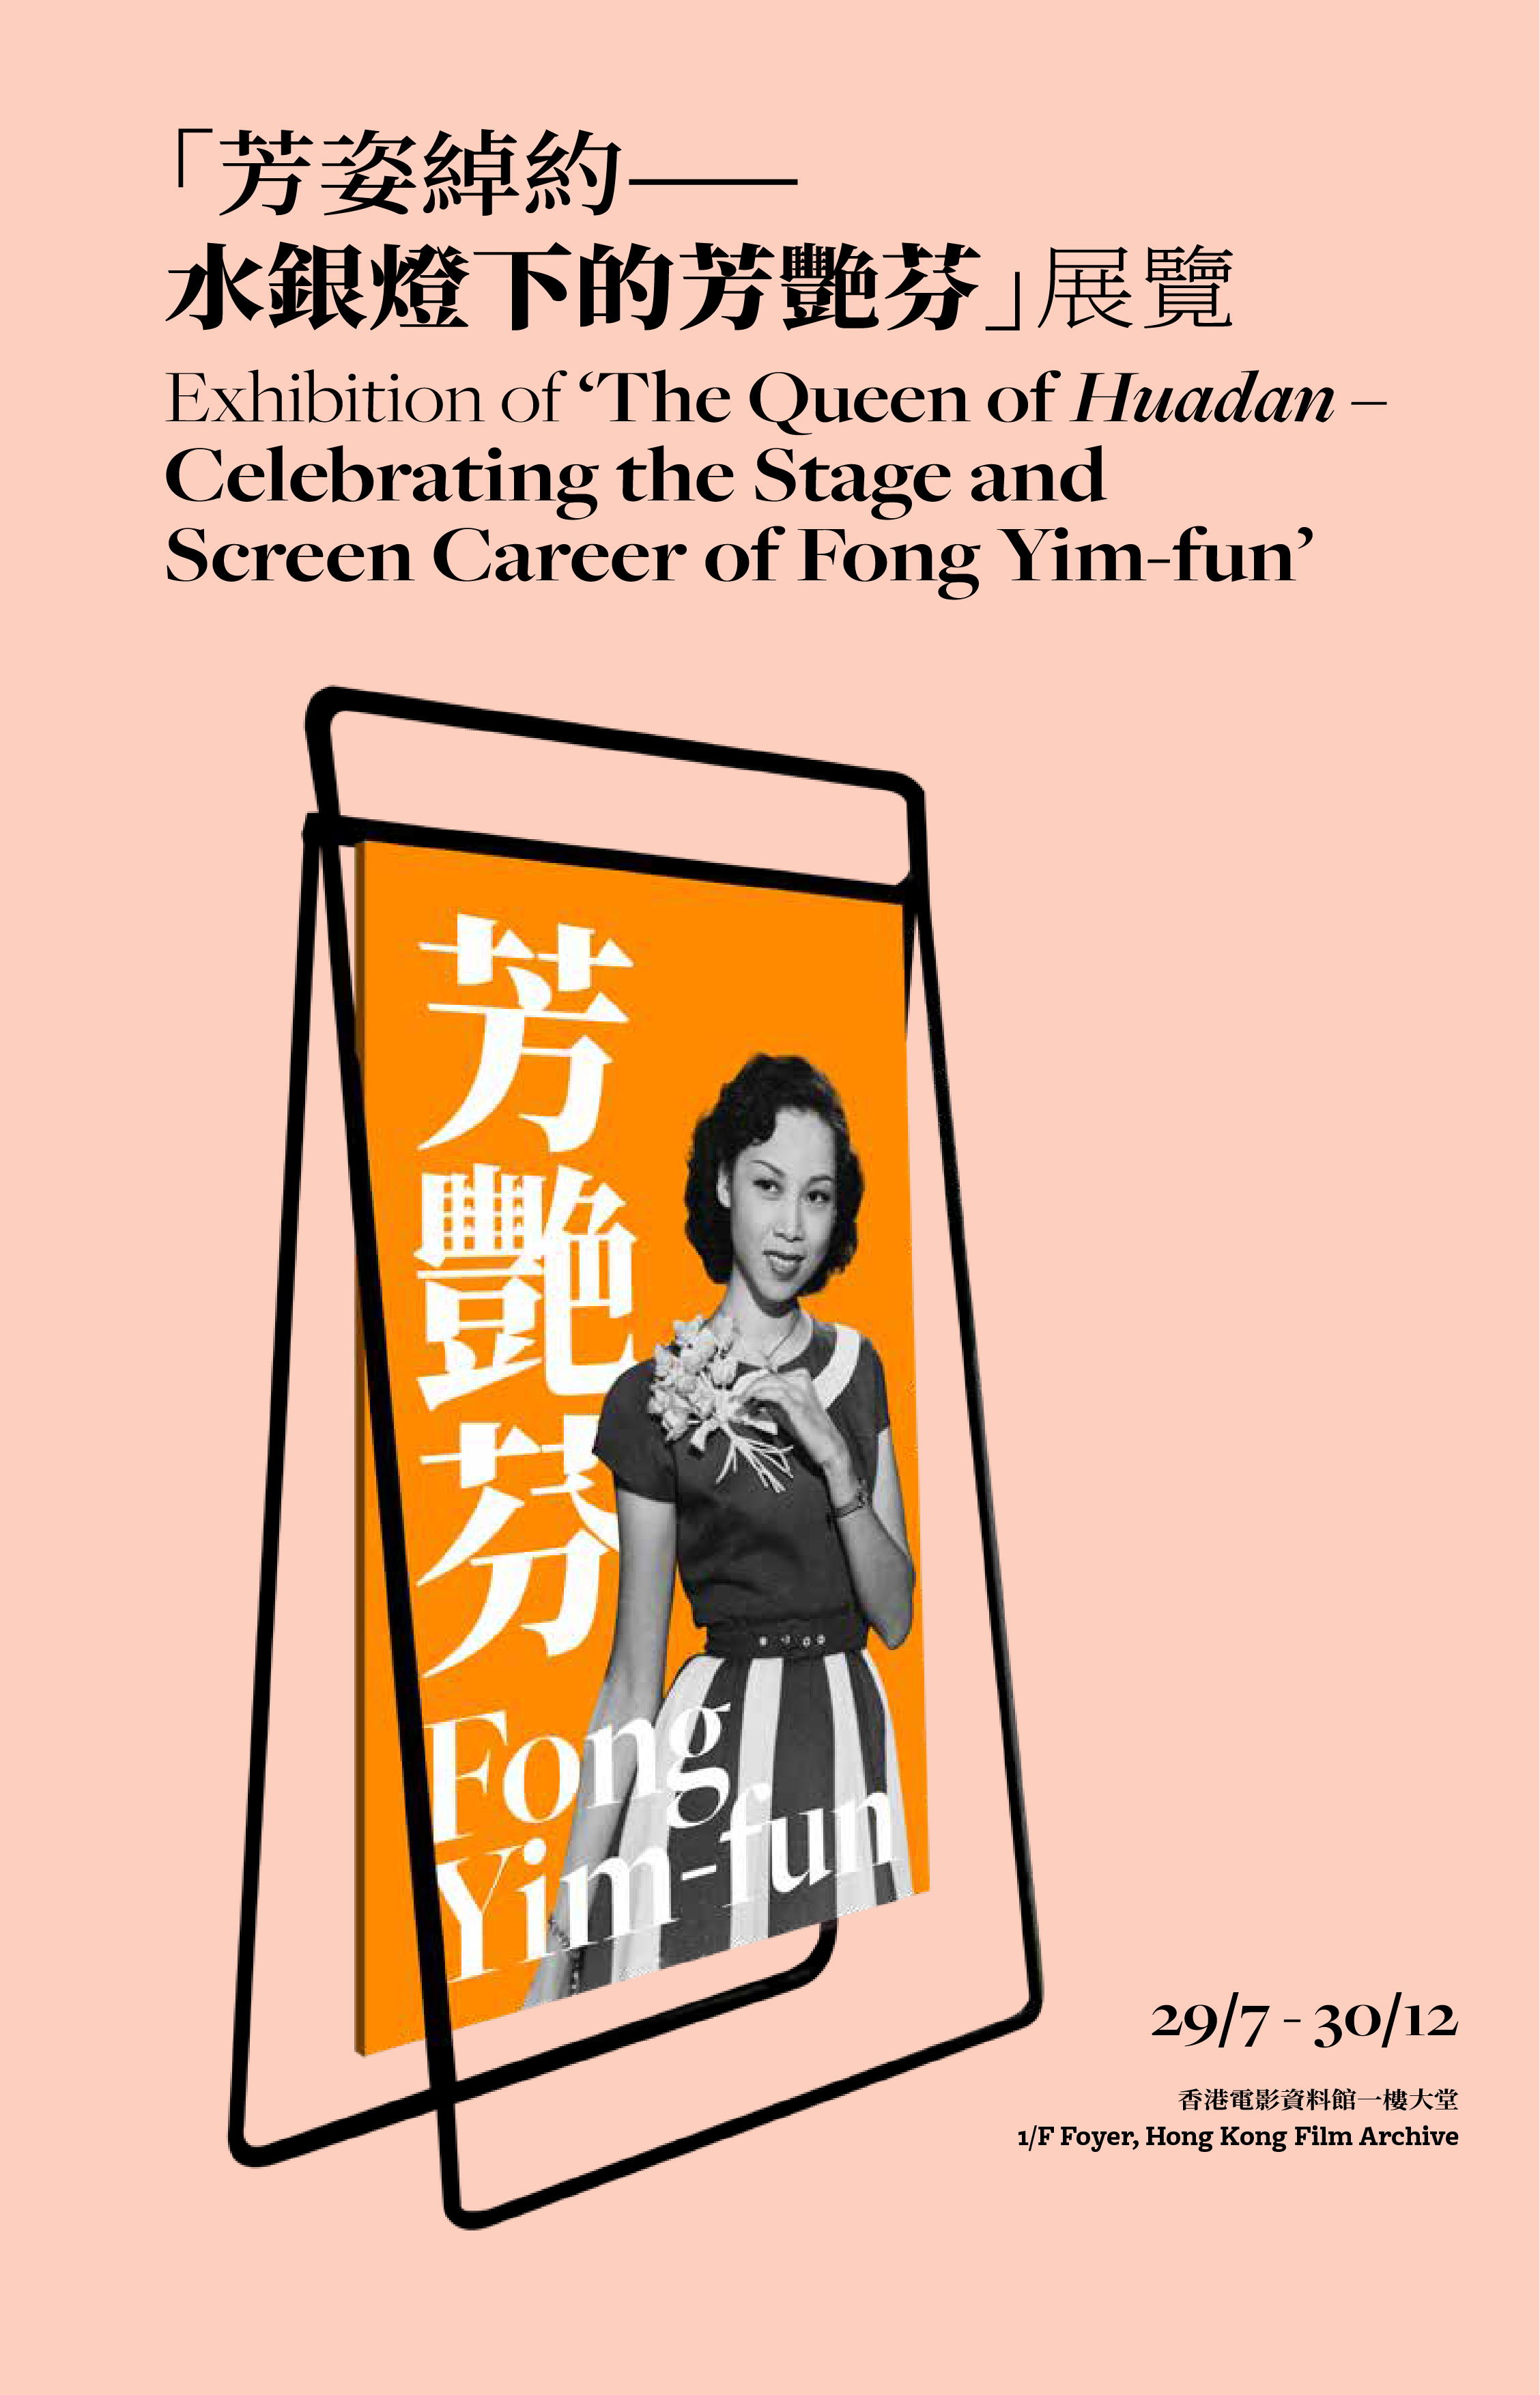 Exhibition of 'The Queen of <i>Huadan</i> – Celebrating the Stage and Screen Career of Fong Yim-fun'